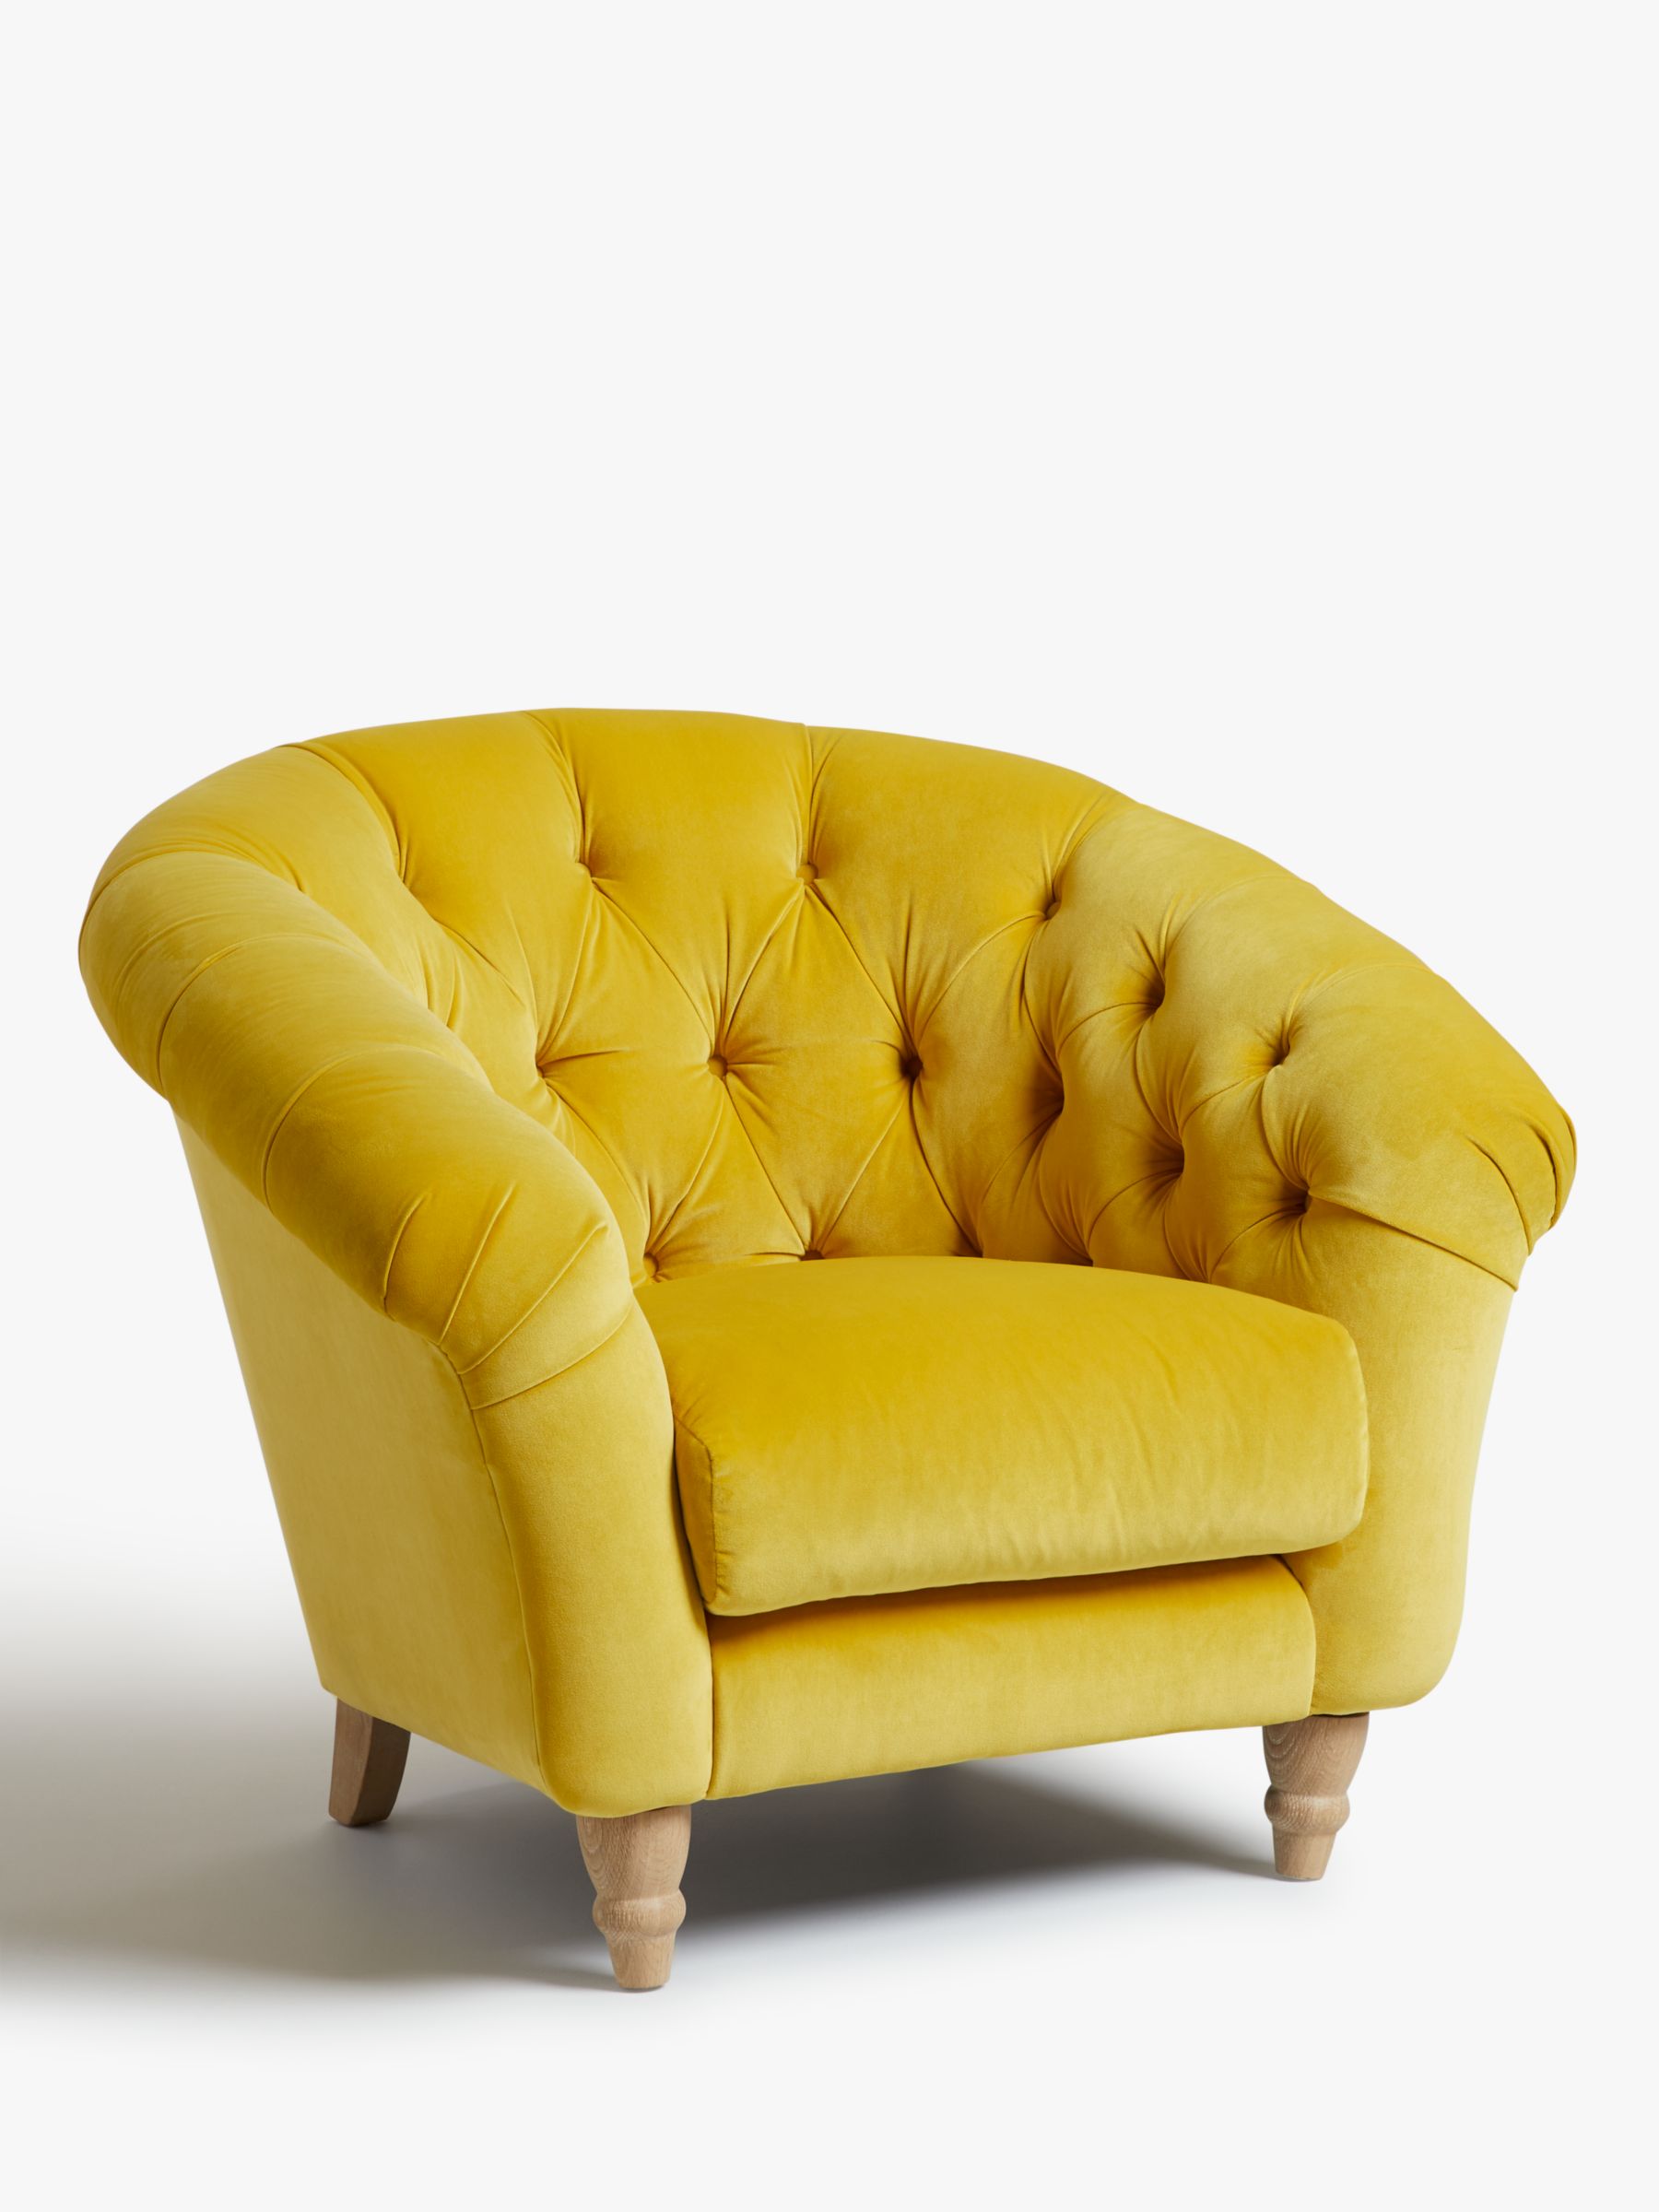 Cupcake Armchair by Loaf at John Lewis, Clever Velvet Bumblebee